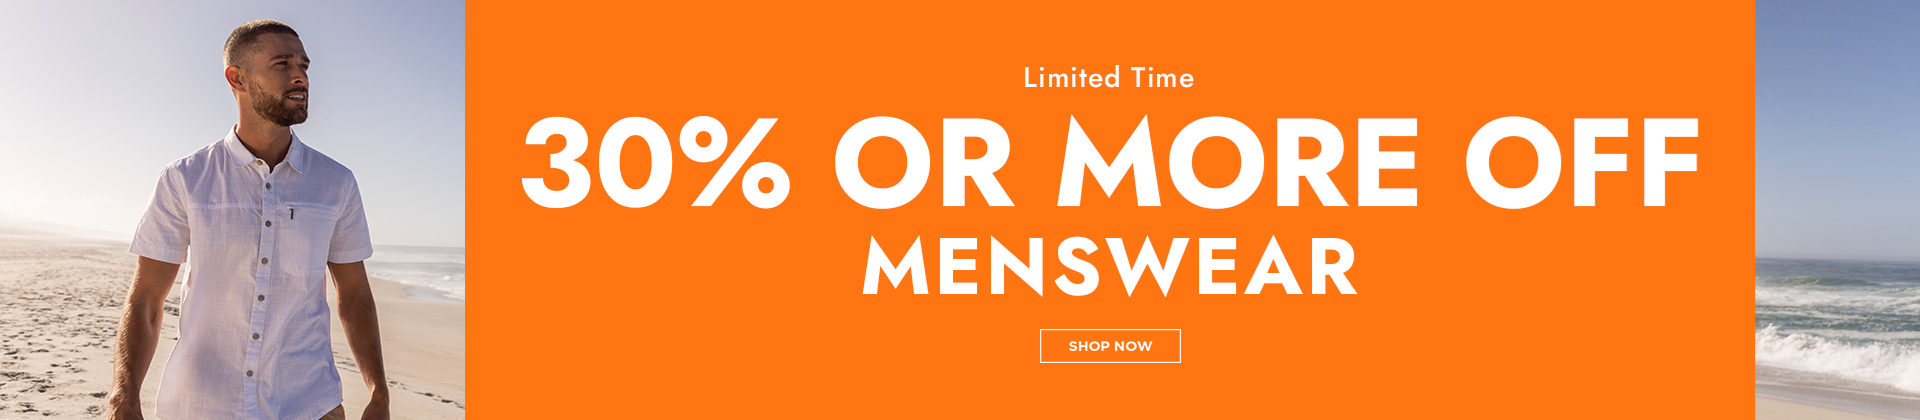 H1: 30% OR MORE ON MENSWEAR